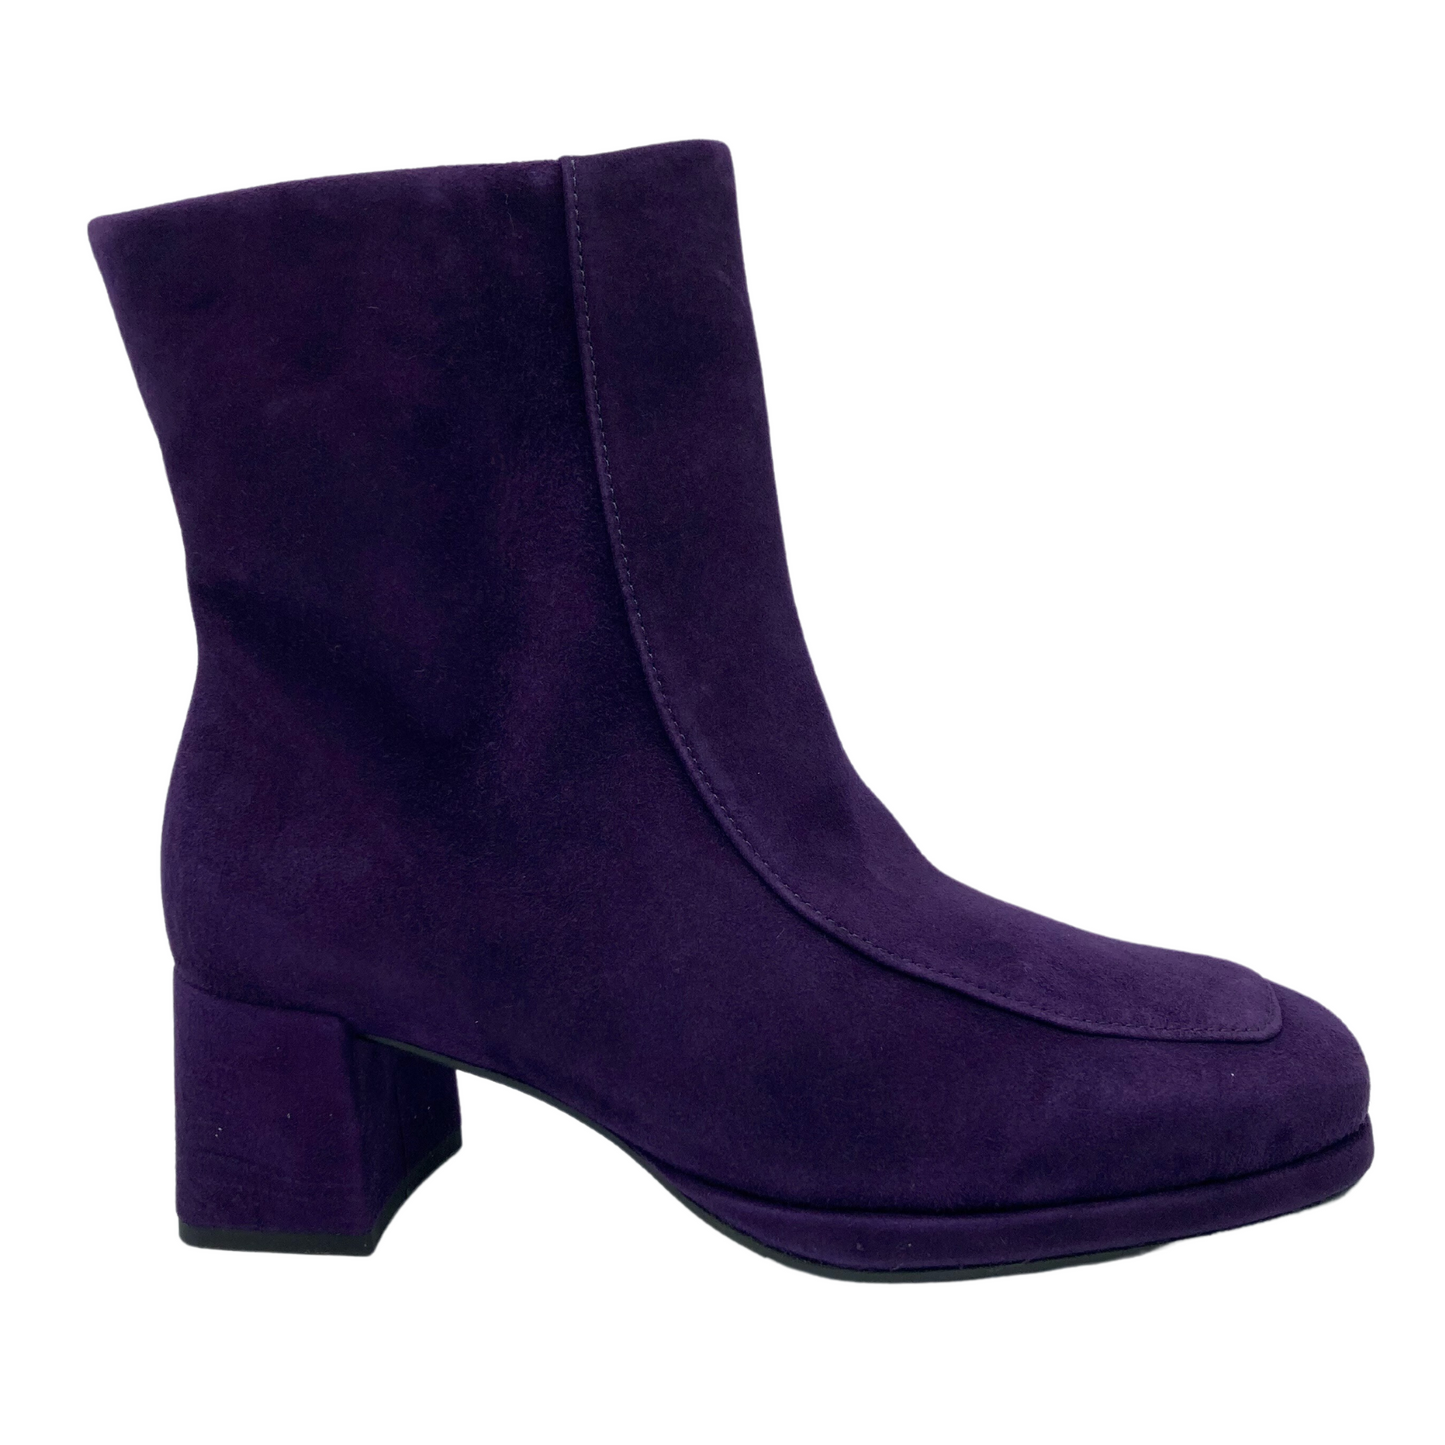 Right facing view of purple suede short boot with block heel and square toe